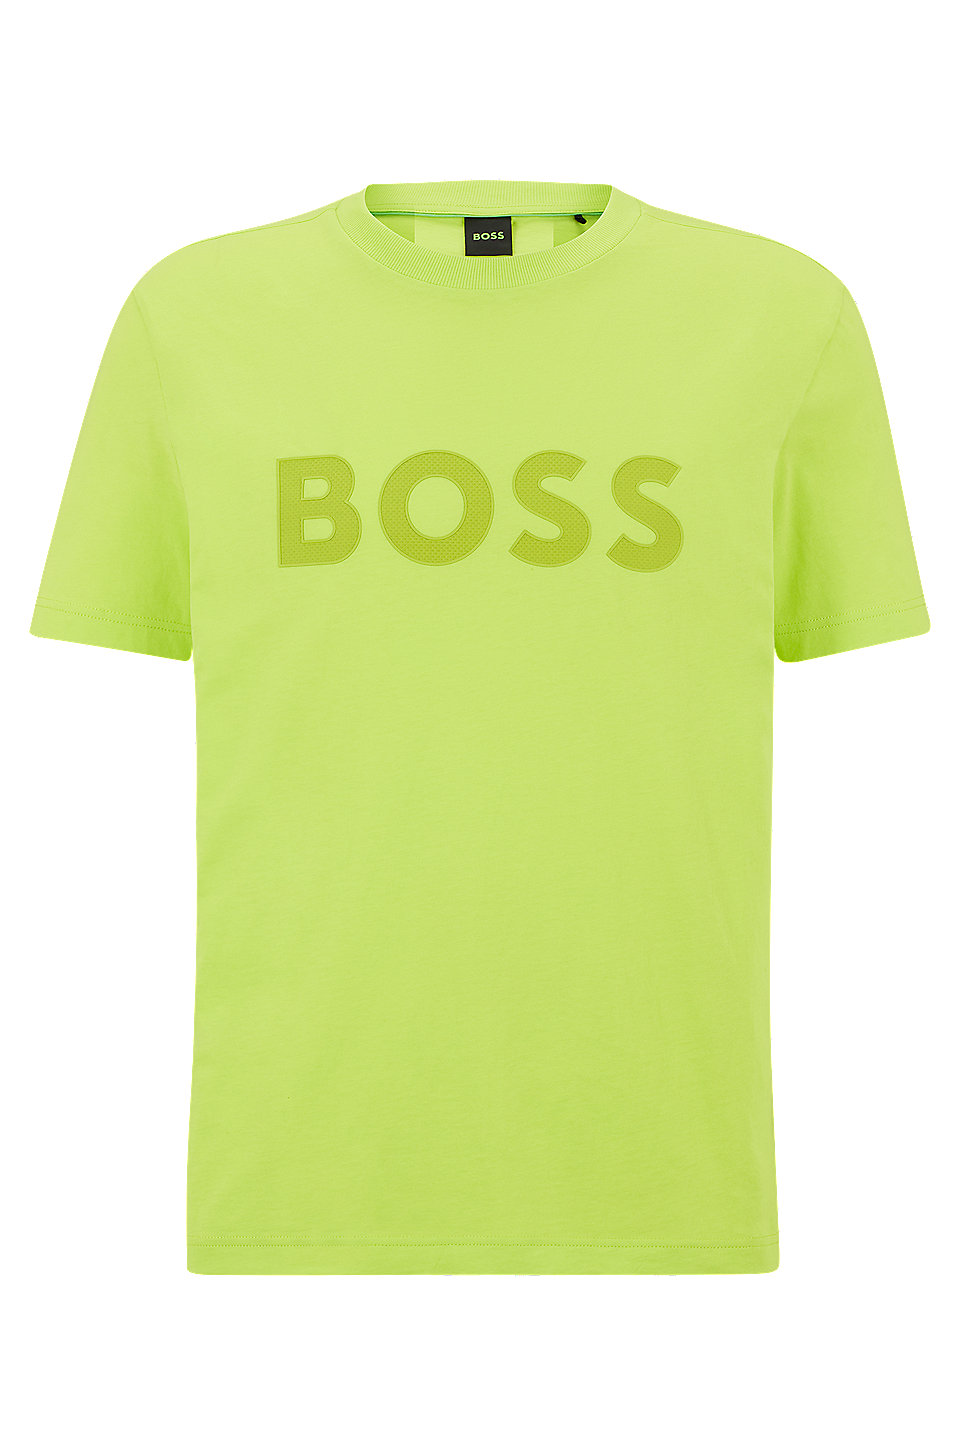 BOSS - Crew-neck T-shirt in cotton jersey with logo print